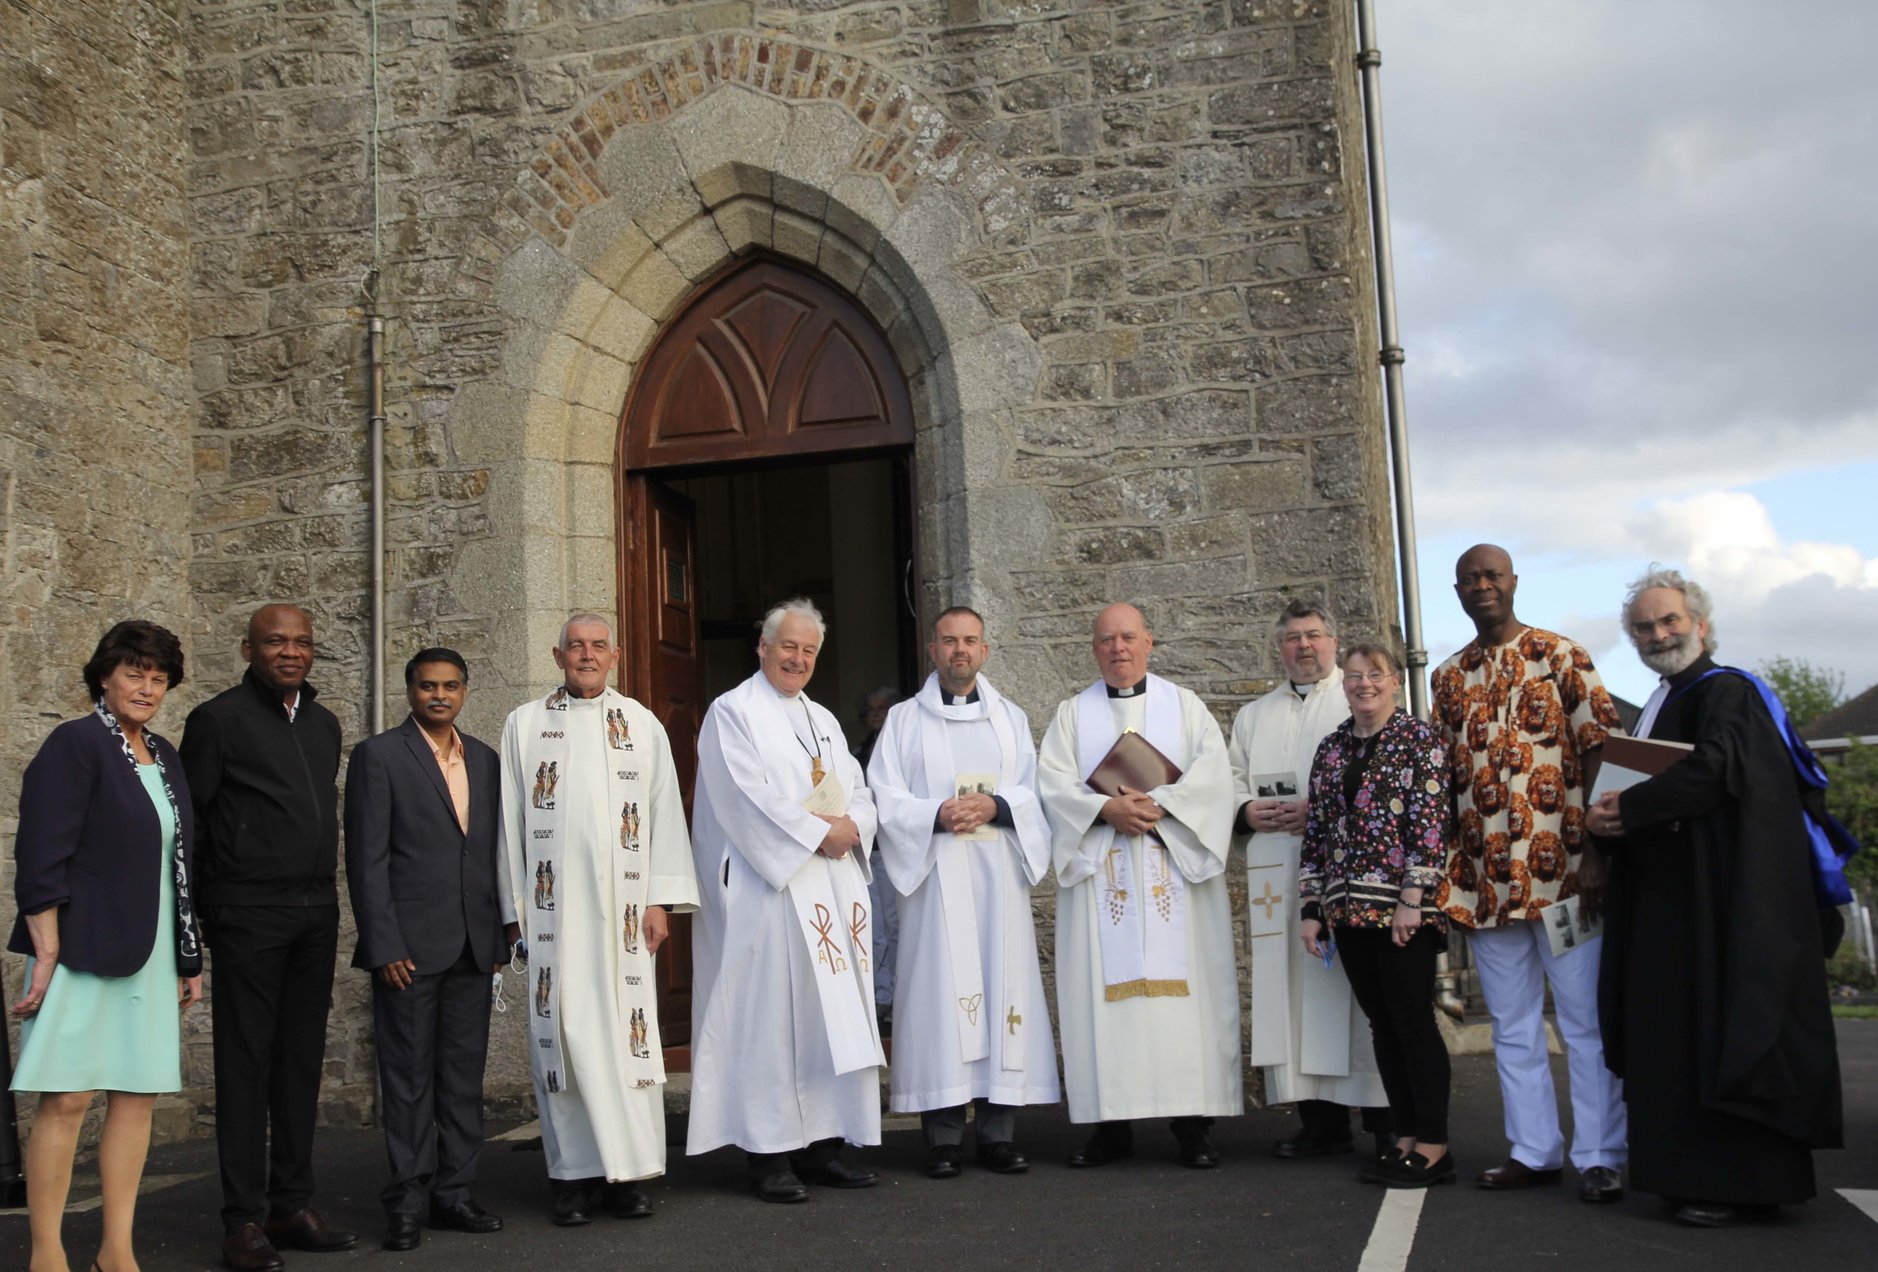 The new rector with Archbishop Michael Jackson and visiting clergy and the church wardens.